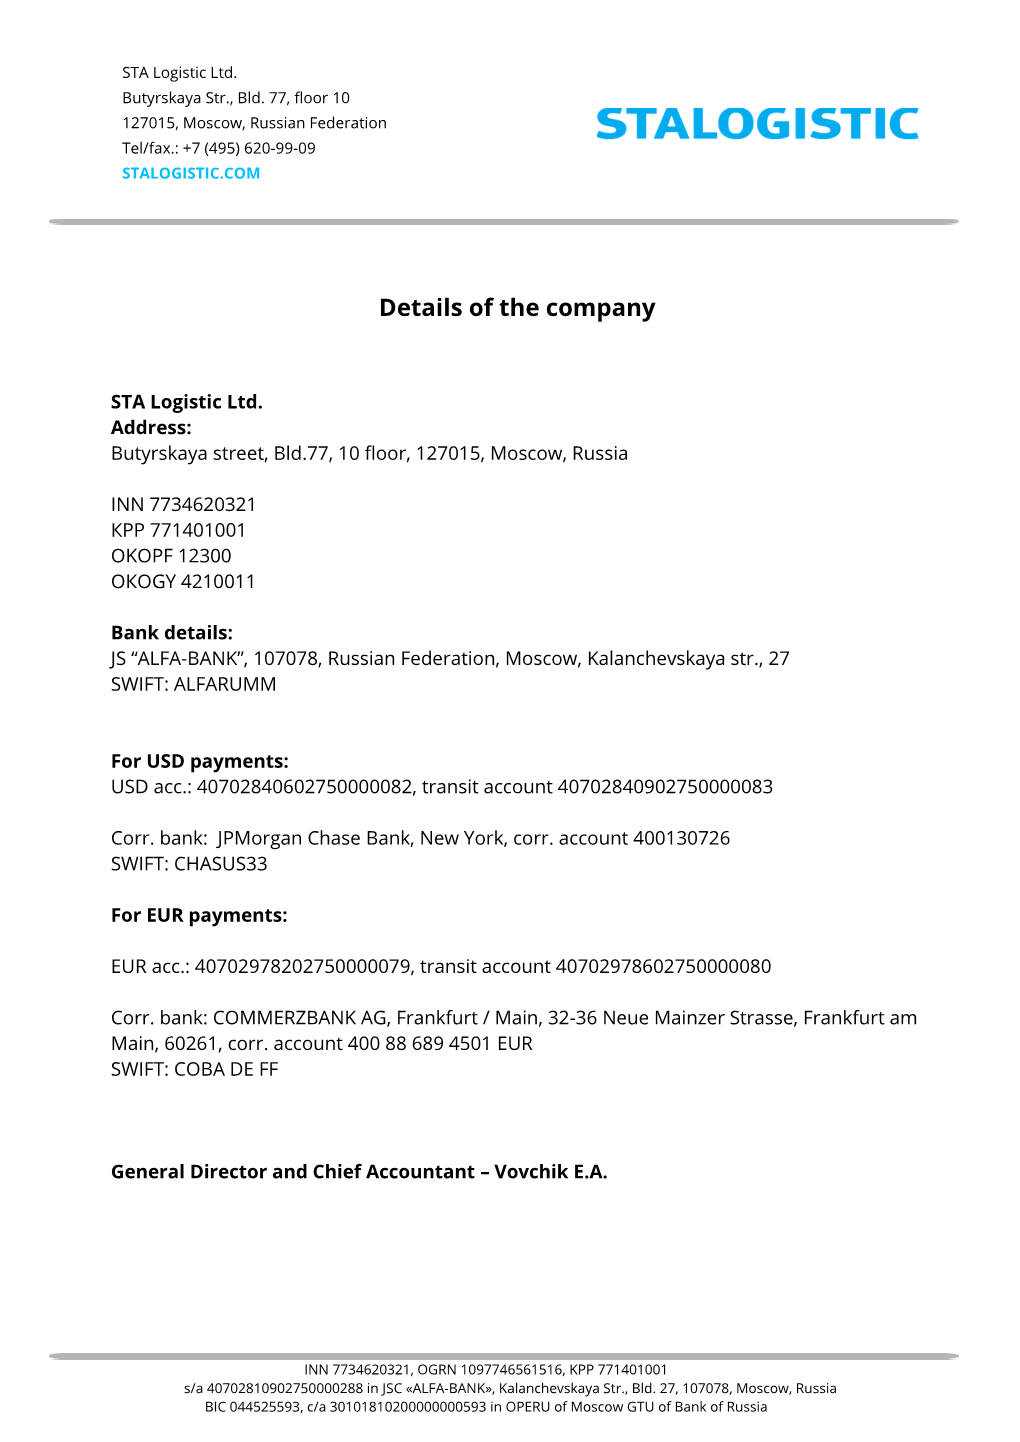 Details of the Company